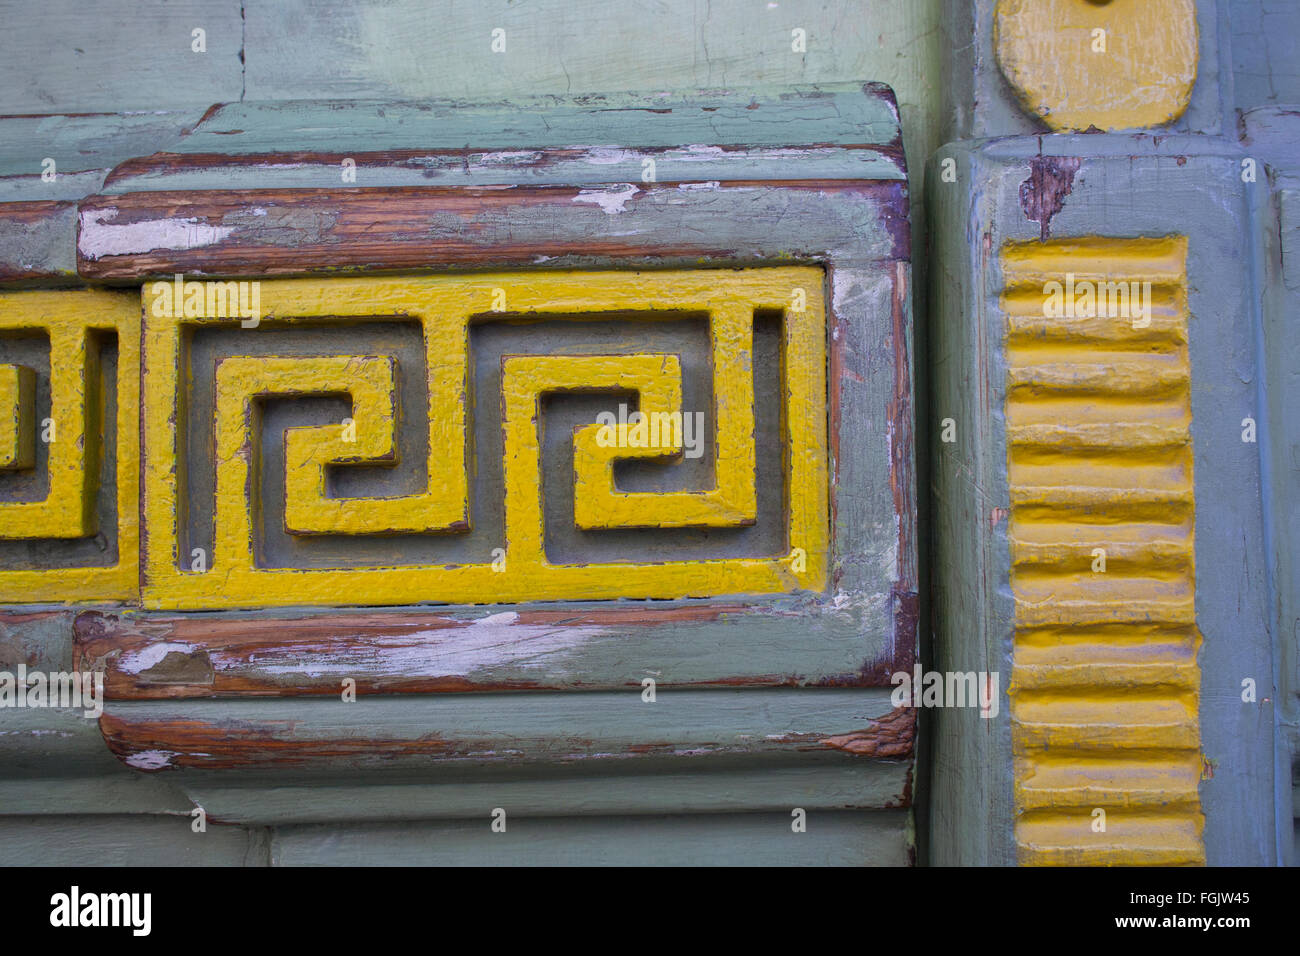 Maze-like carved pattern on a door in the old town, Tallinn, Estonia Stock Photo